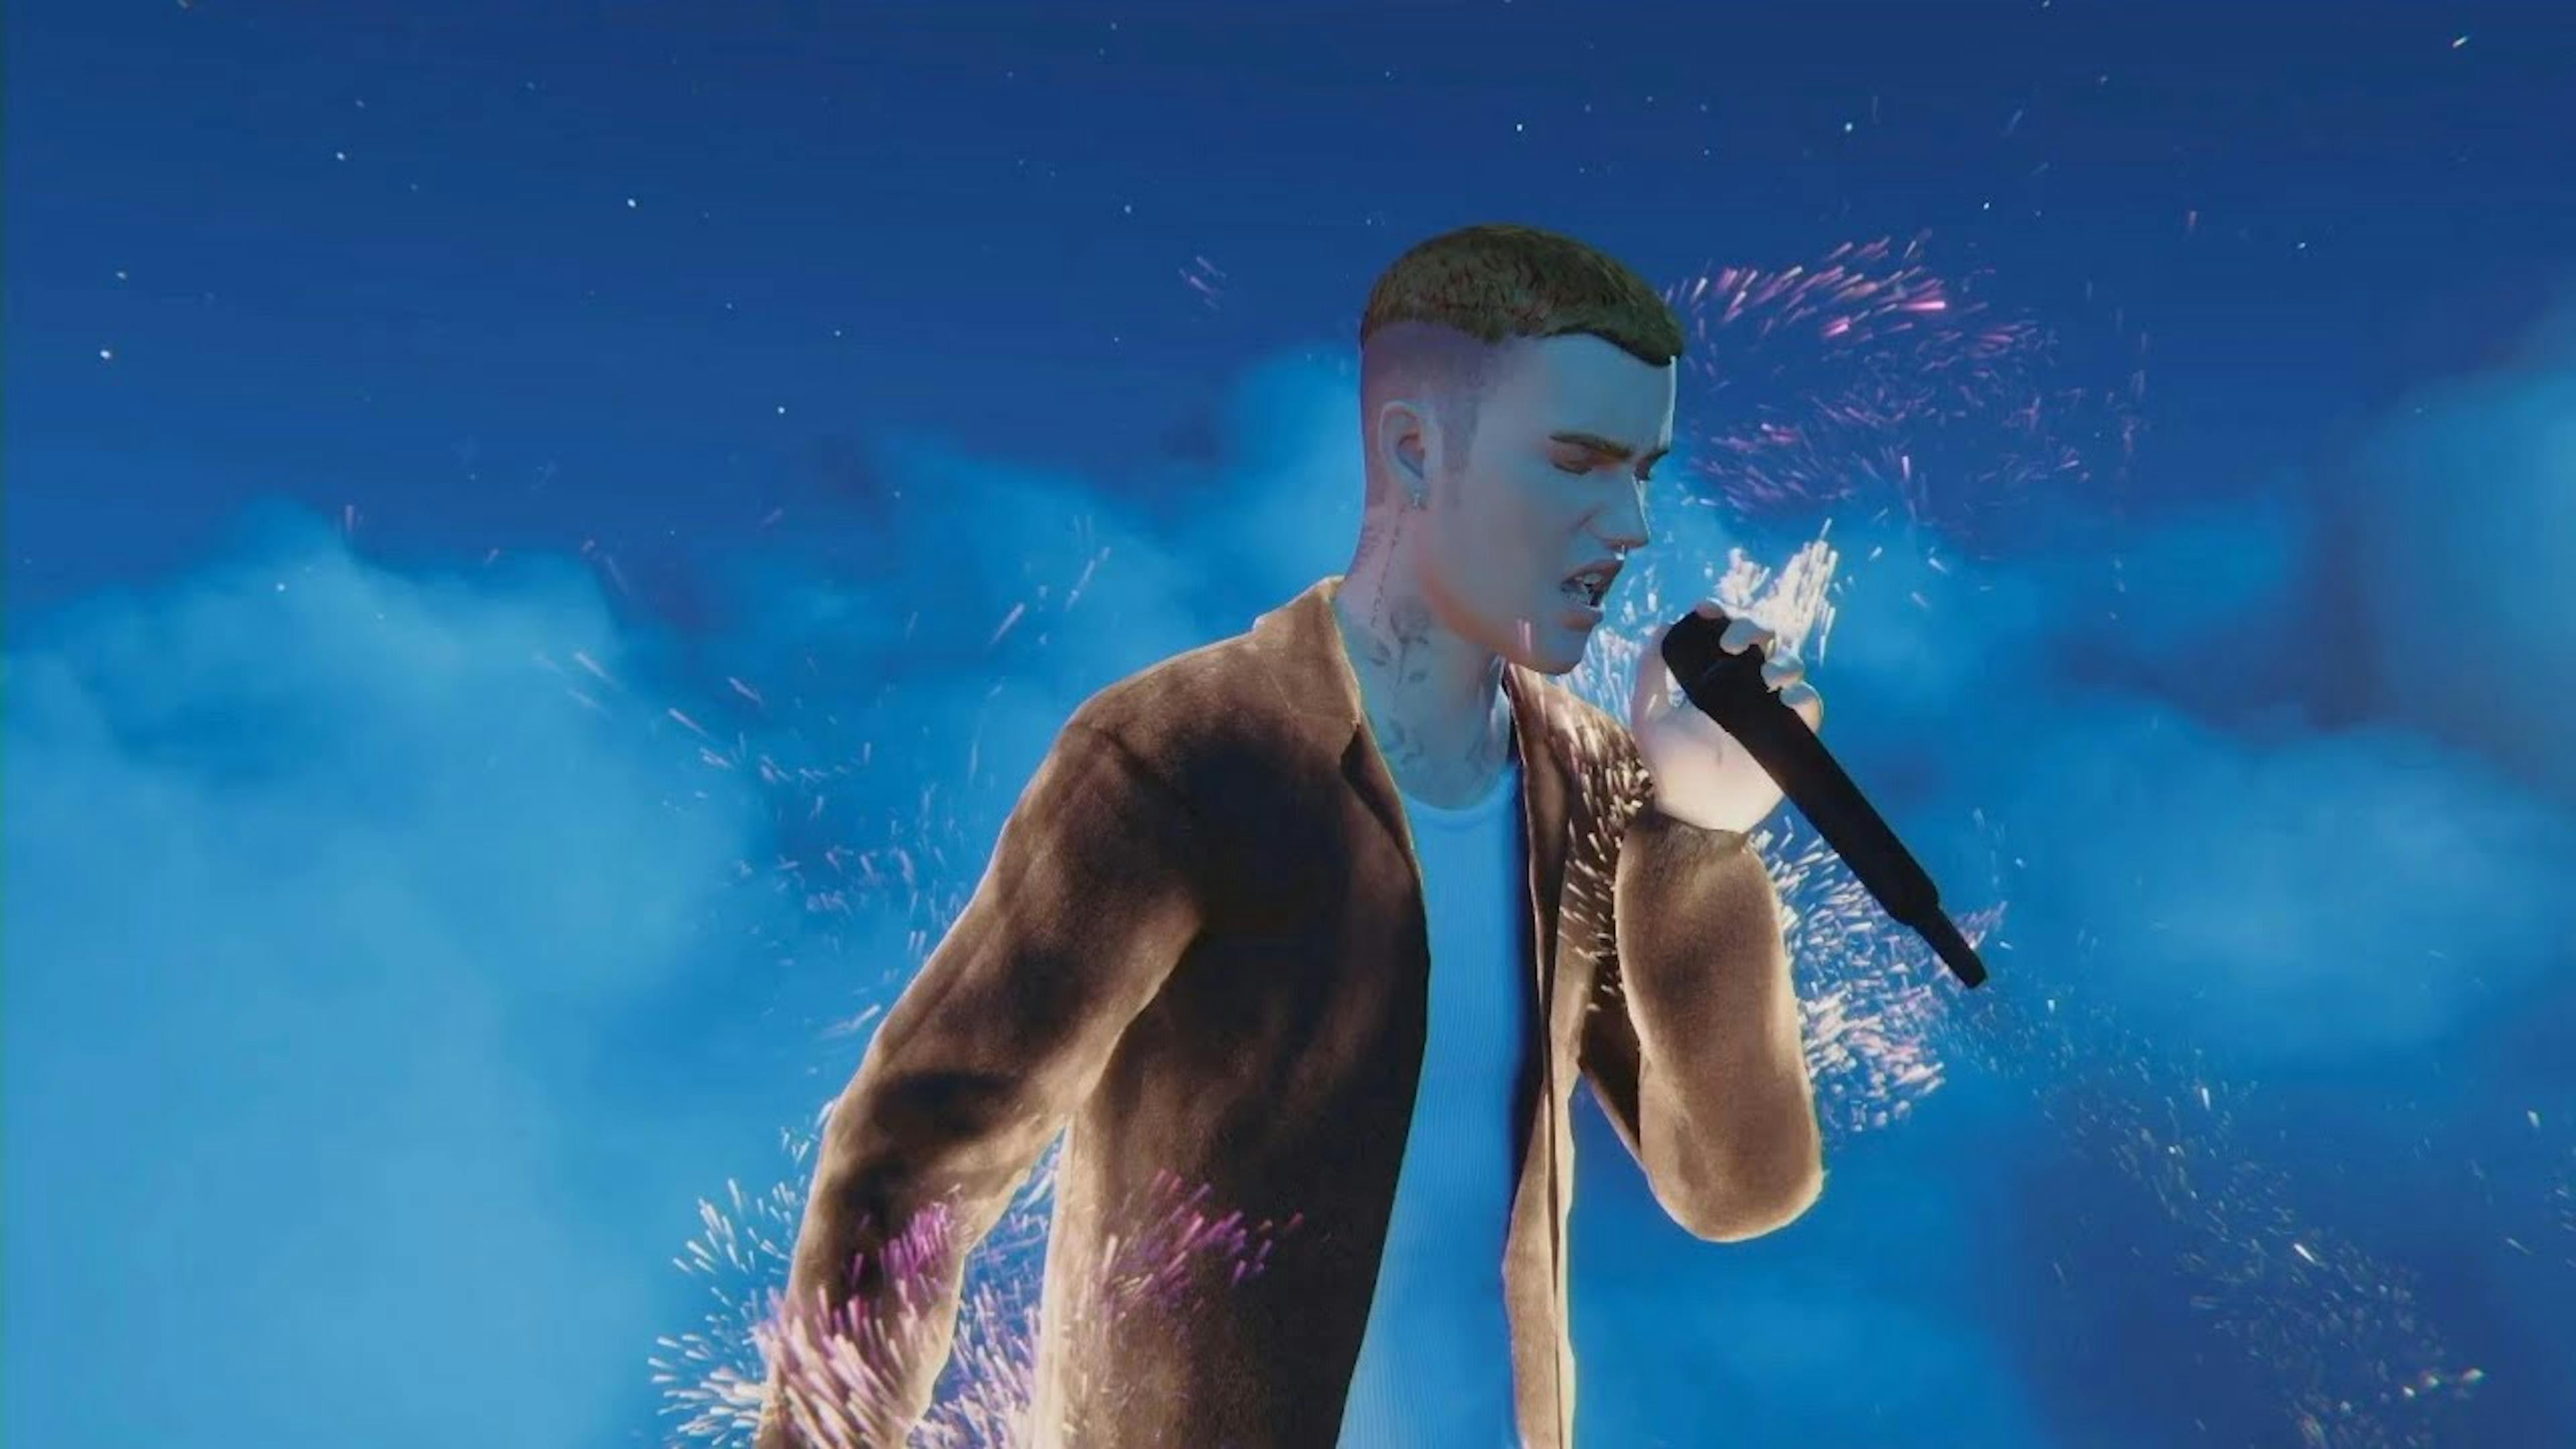 Justin Bieber live from The Metaverse Virtual Concert